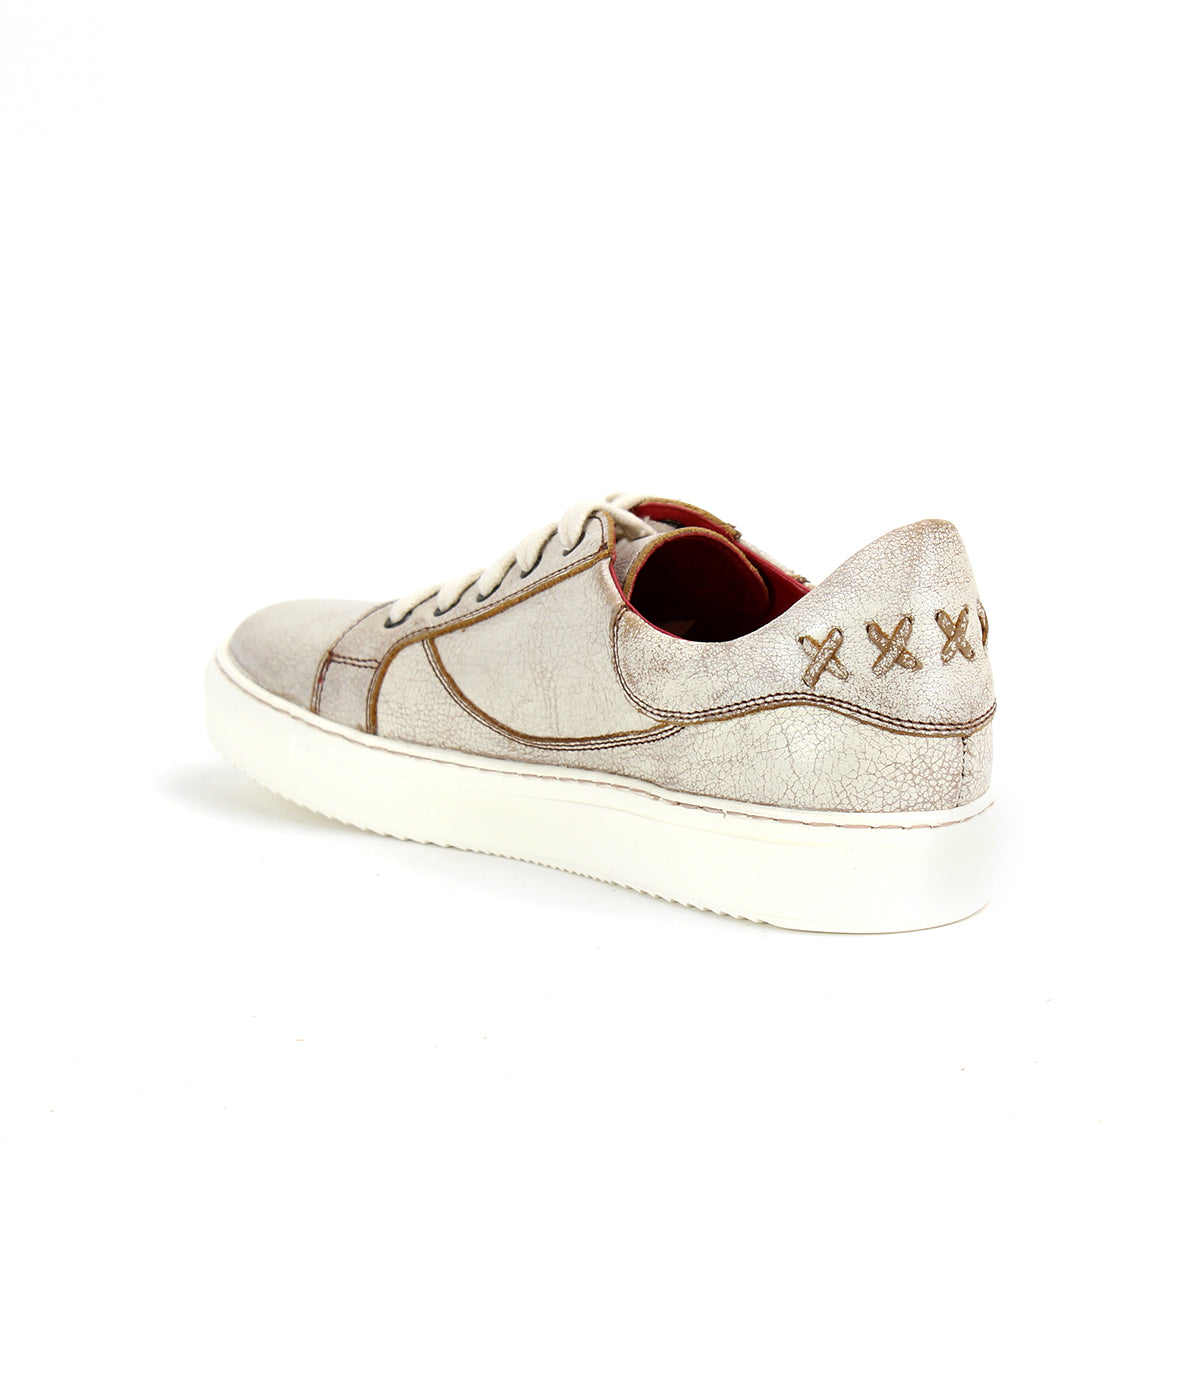 A white Azeli sneaker with gold stitching, produced by Bed Stu.